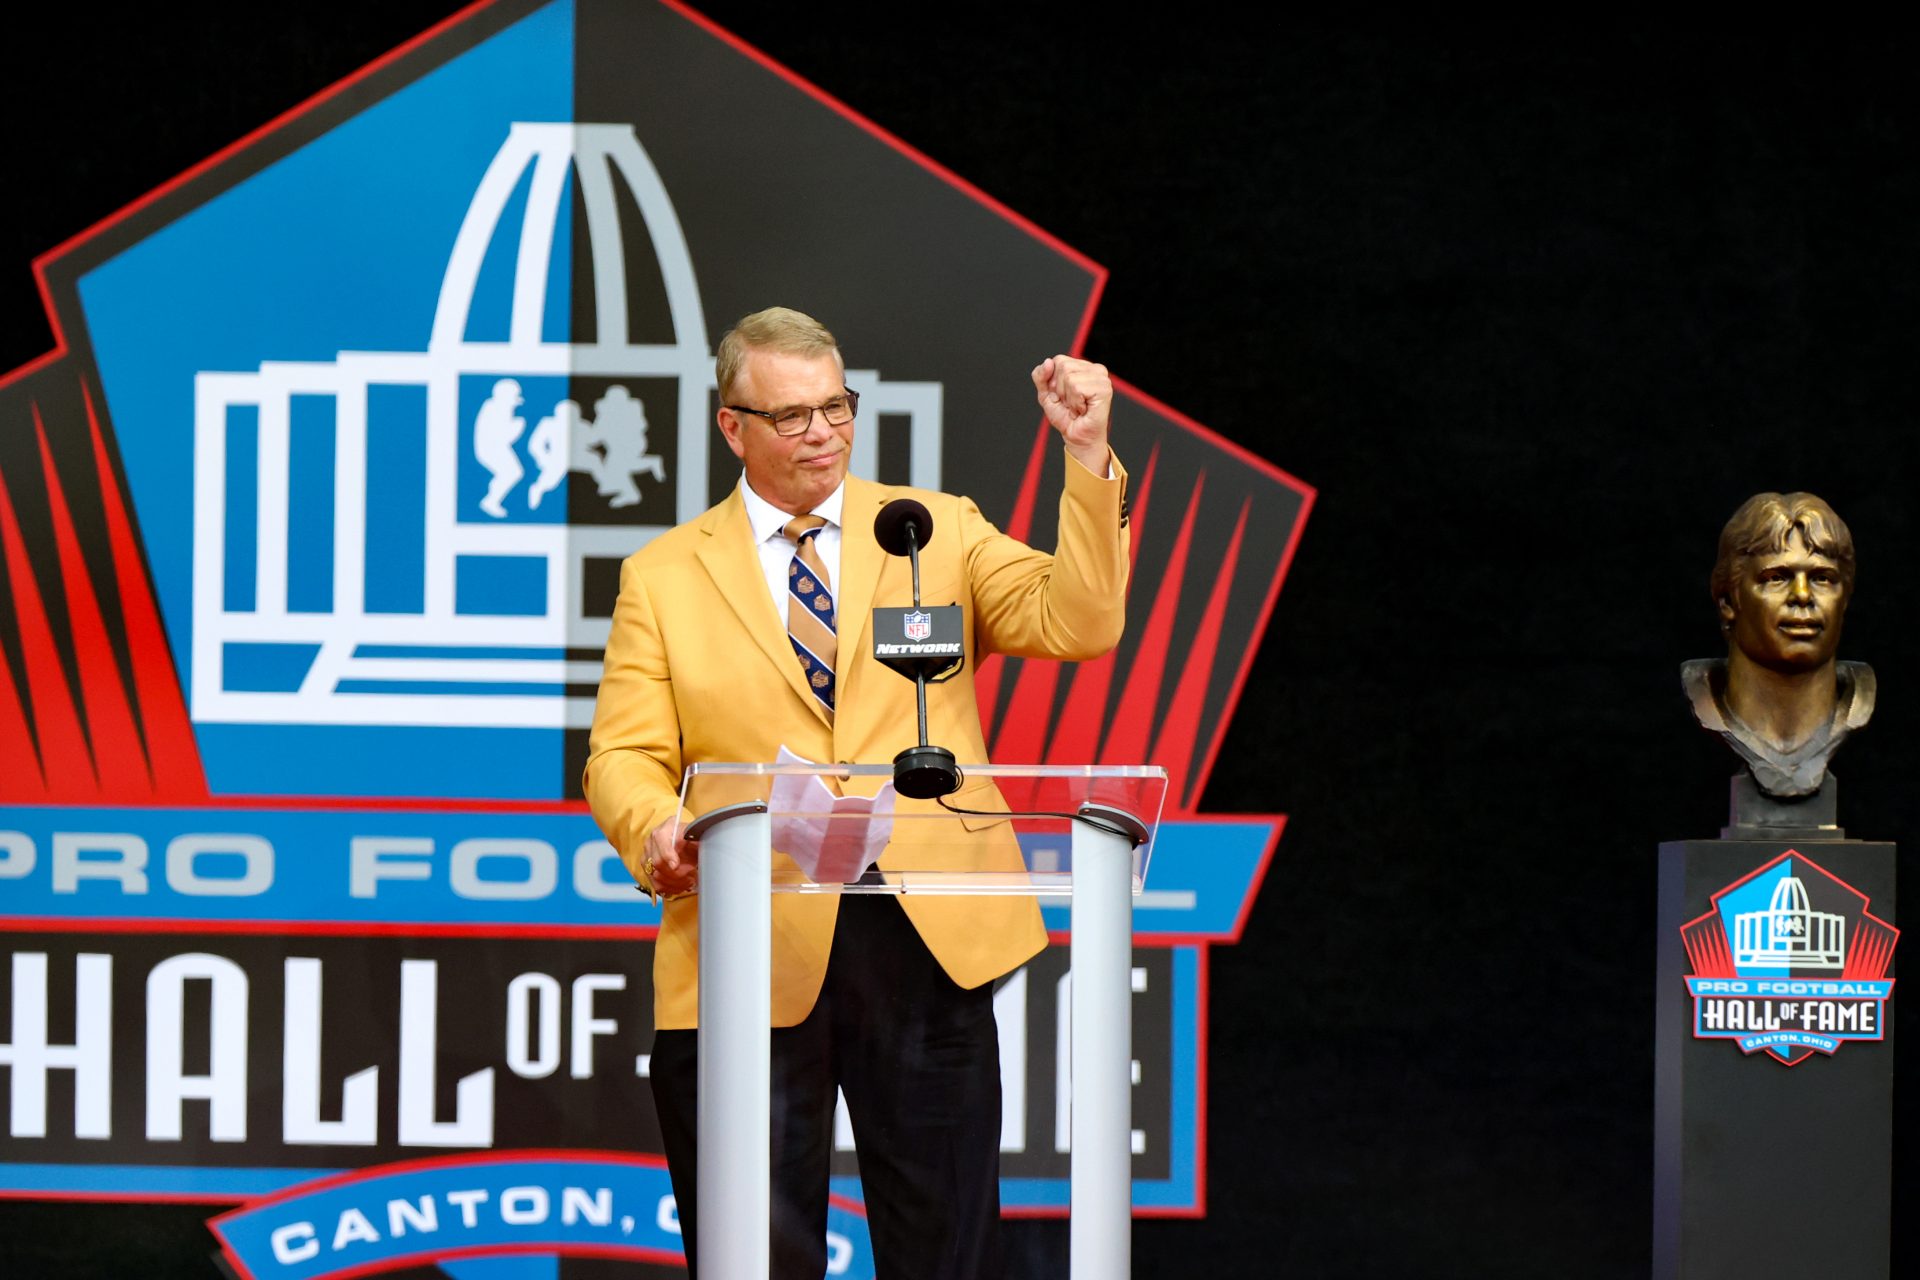 8: Which team has the most players in the Pro Football Hall of Fame?